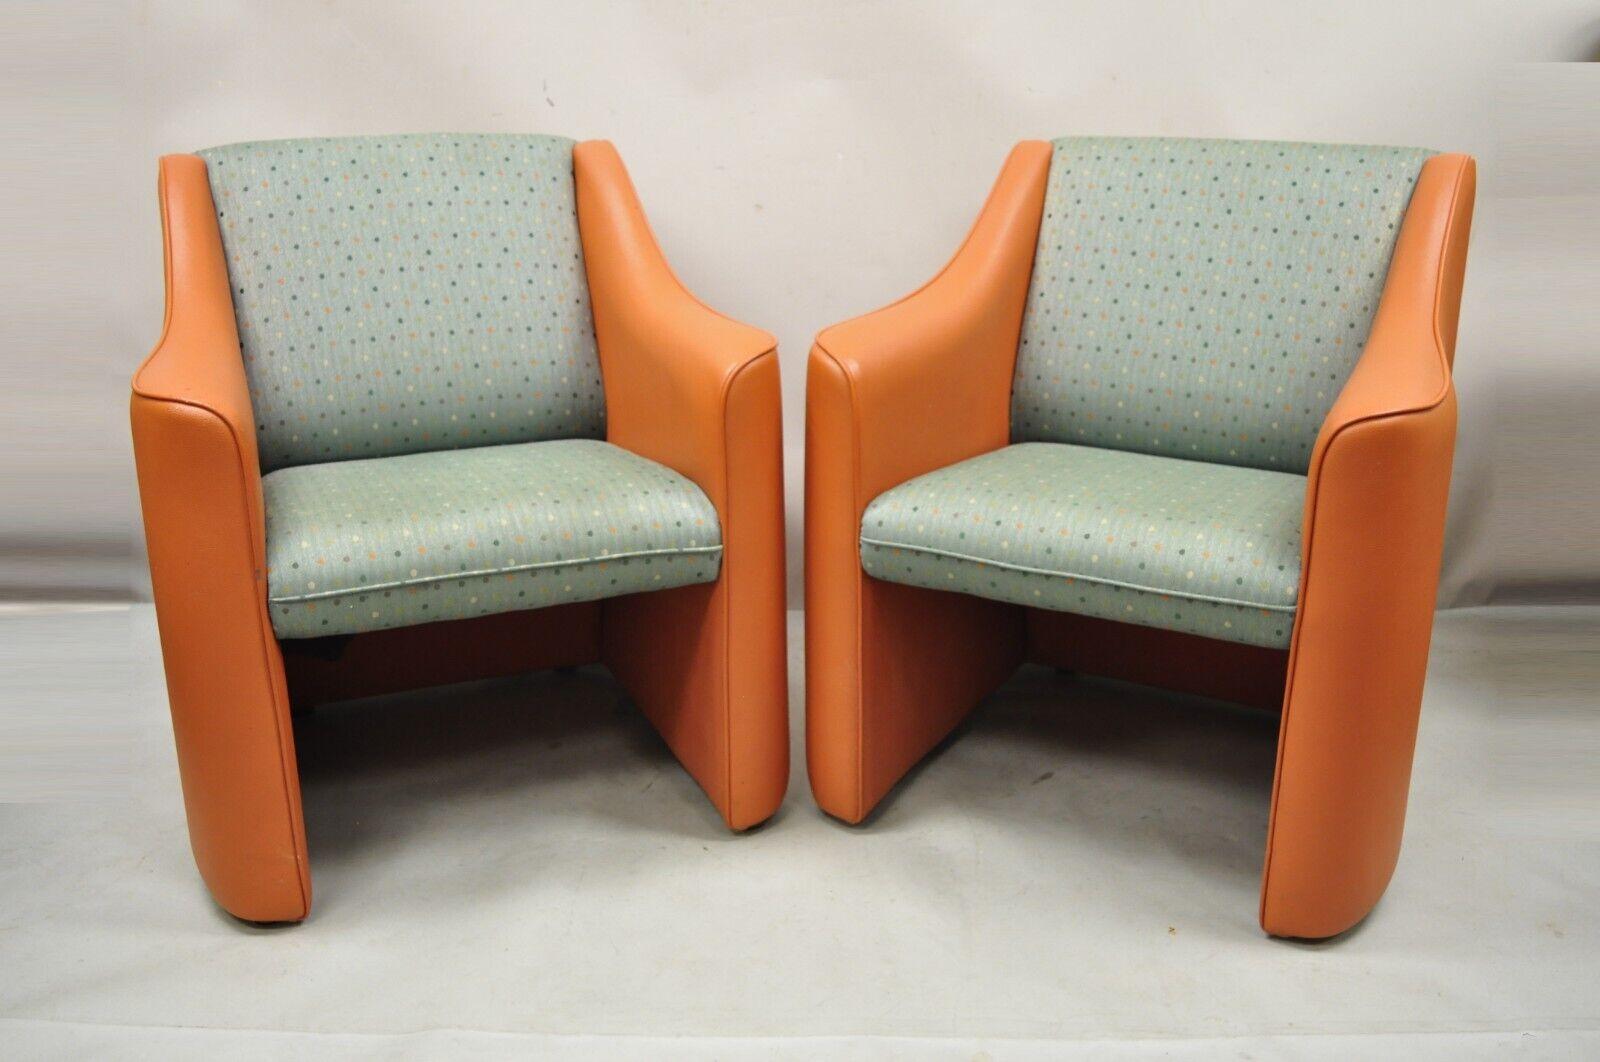 Modern Orange Upholstered Green Polka Dot Club Lounge Chairs - a Pair. Item features burnt orange vinyl wrapped frames, green upholstered back and seats with polka dots, solid wood frames, very nice vintage pair, clean modernist lines, quality